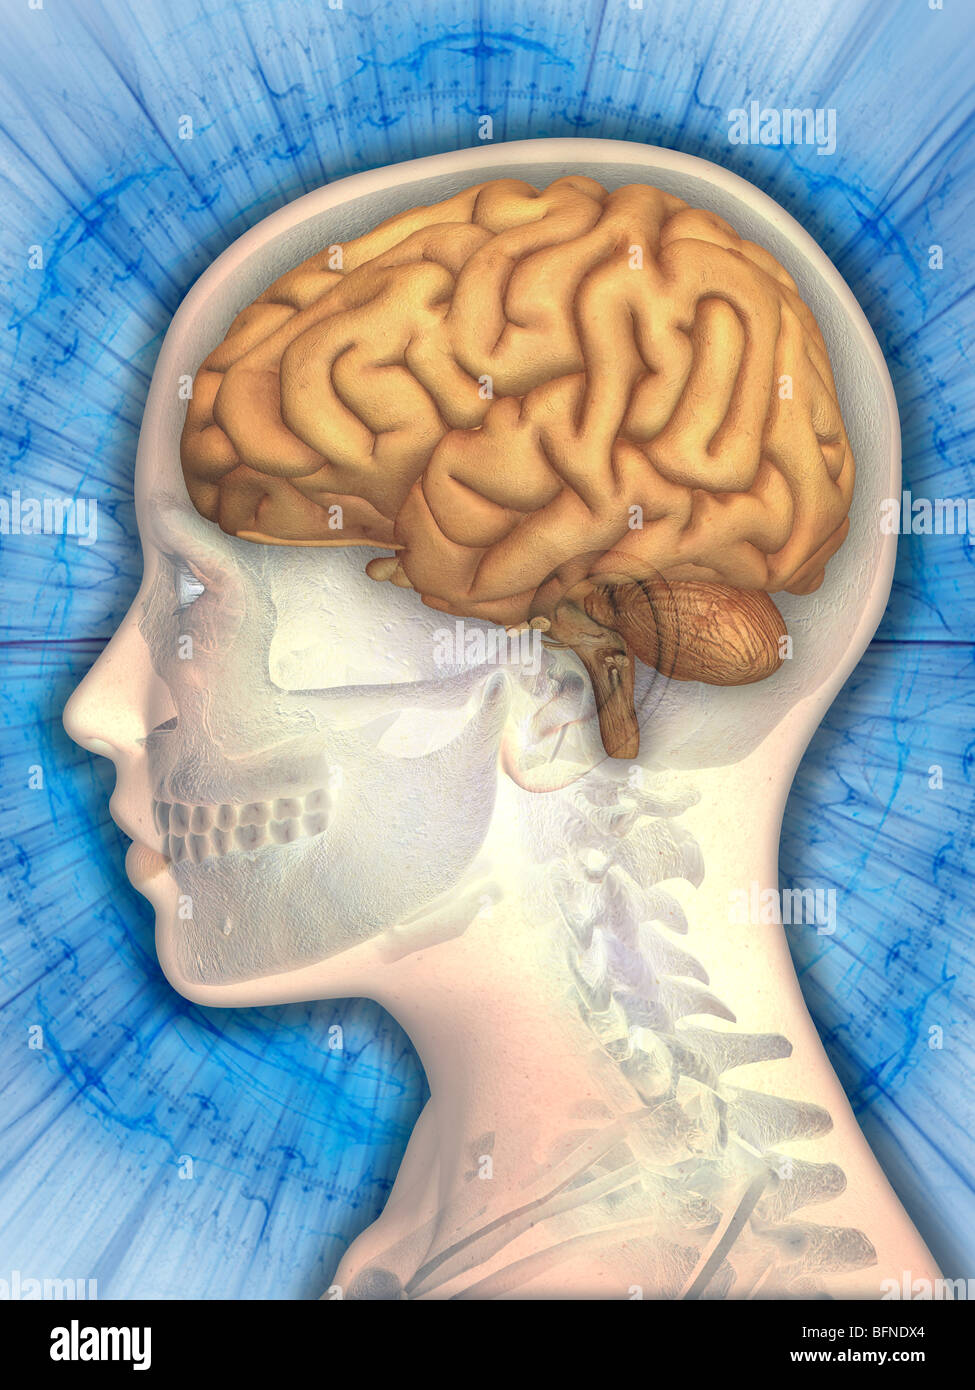 Illustration of the human brain superimposed over a female head Stock Photo